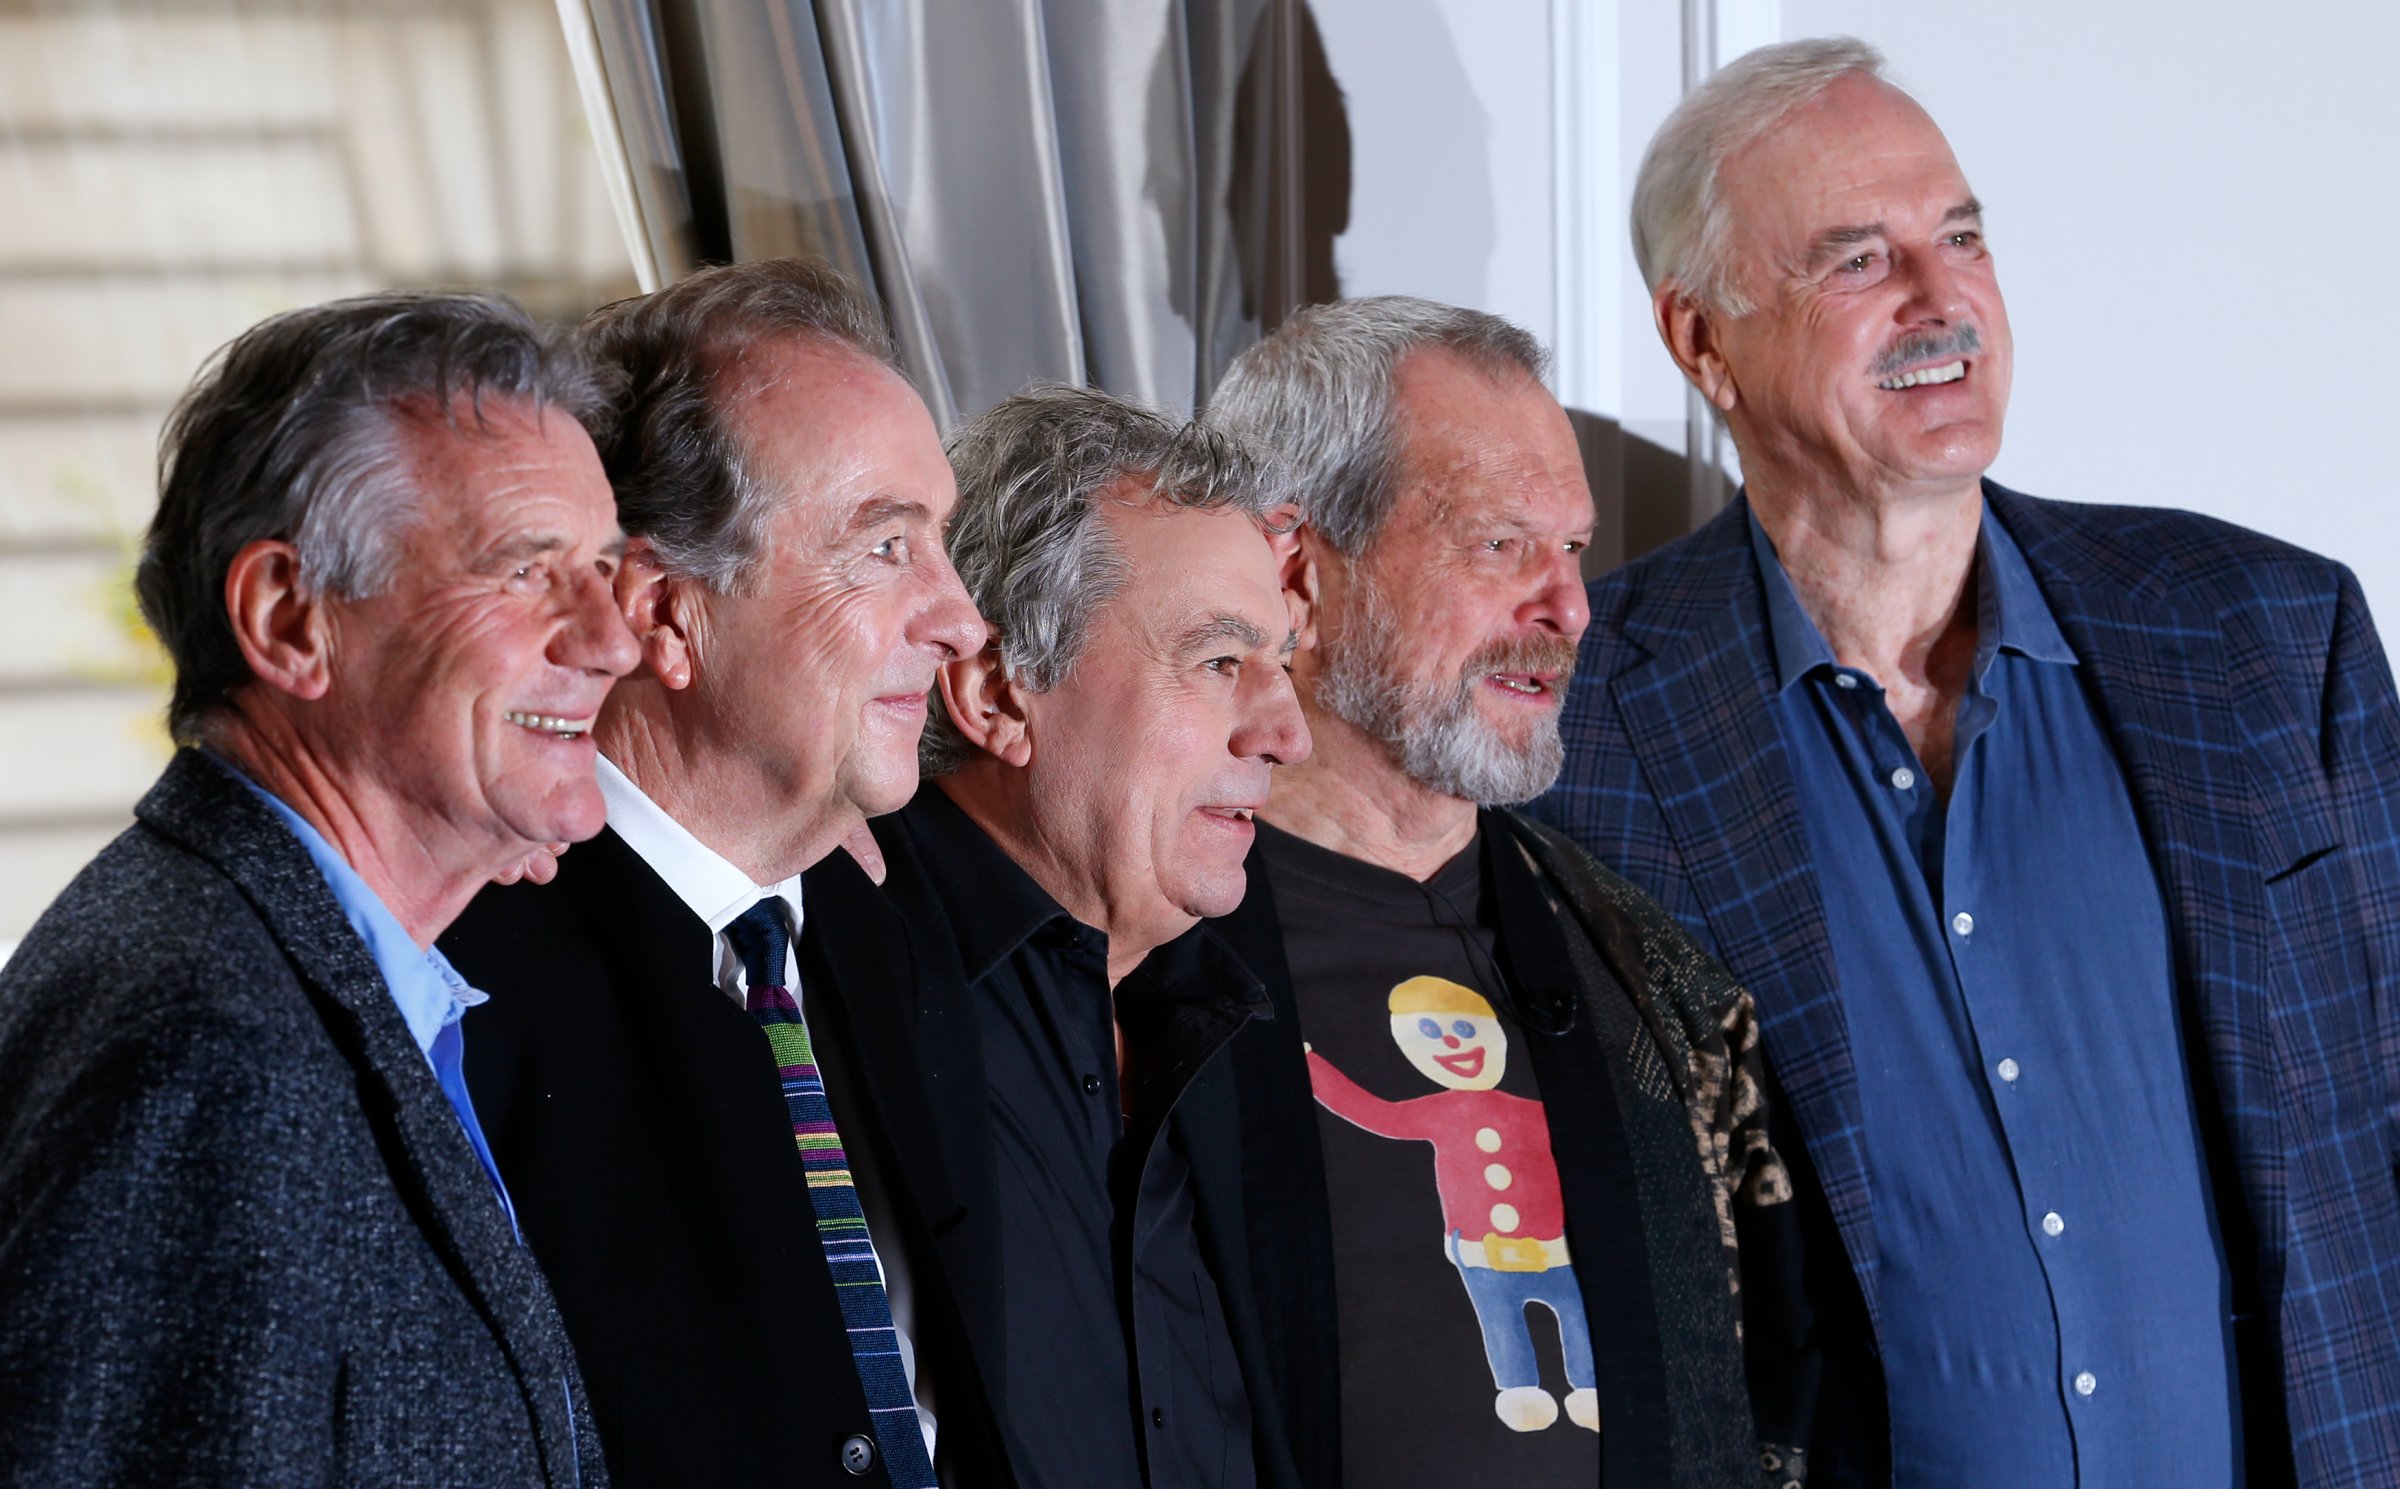 From left: Michael Palin, Eric Idle, Terry Jones, Terry Gilliam and John Cleese of Monty Python in London on Nov. 21, 2013.